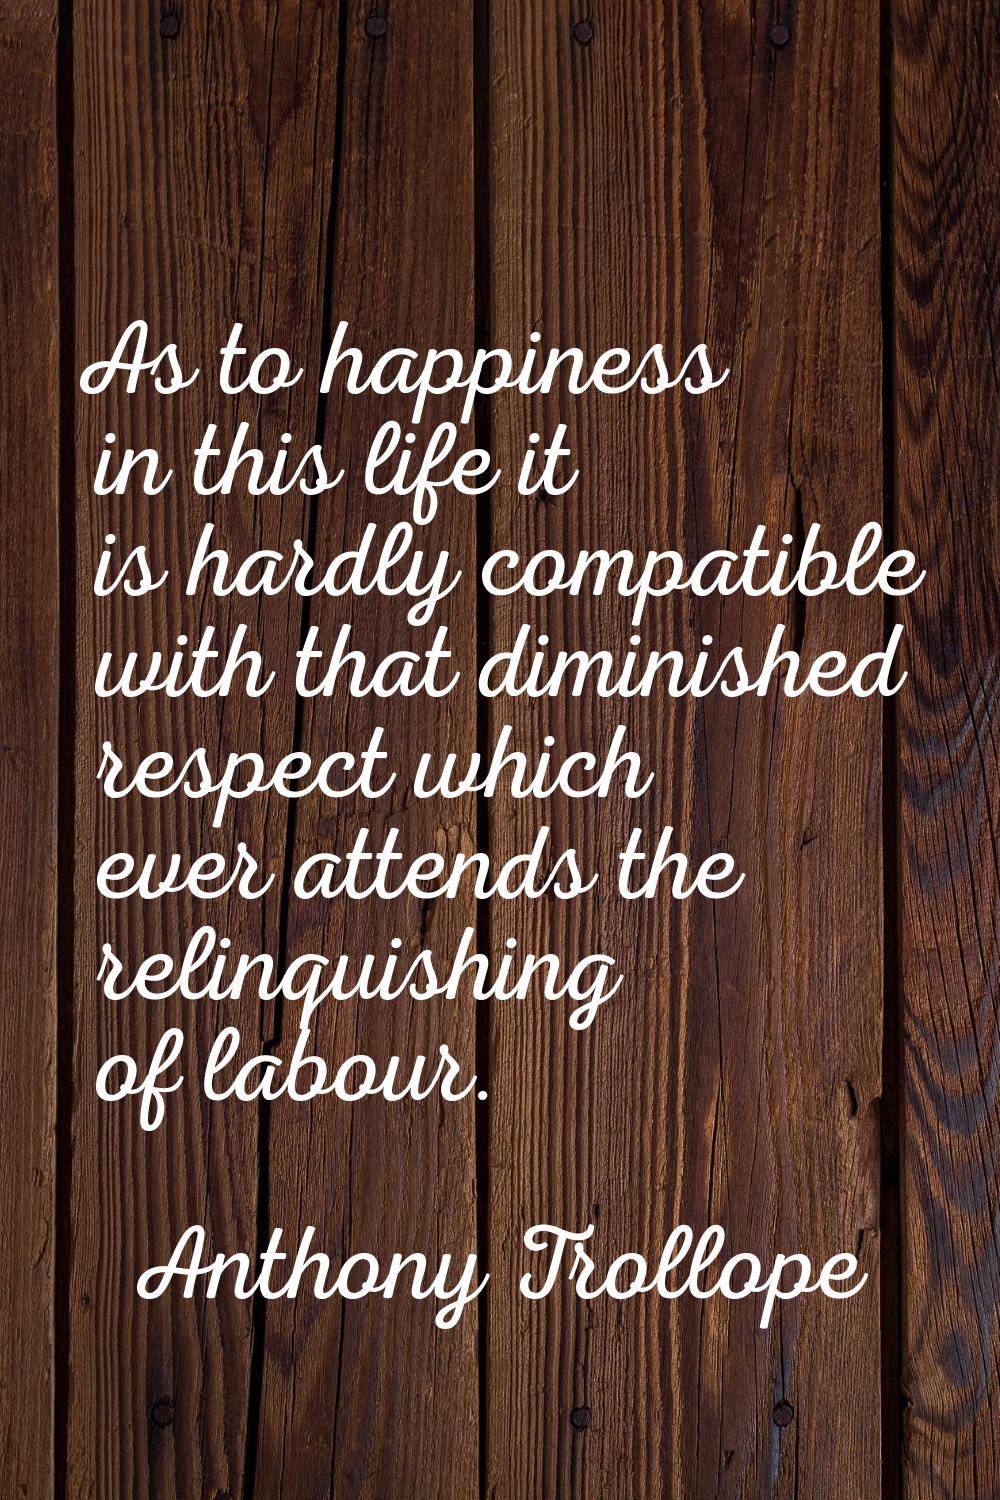 As to happiness in this life it is hardly compatible with that diminished respect which ever attend